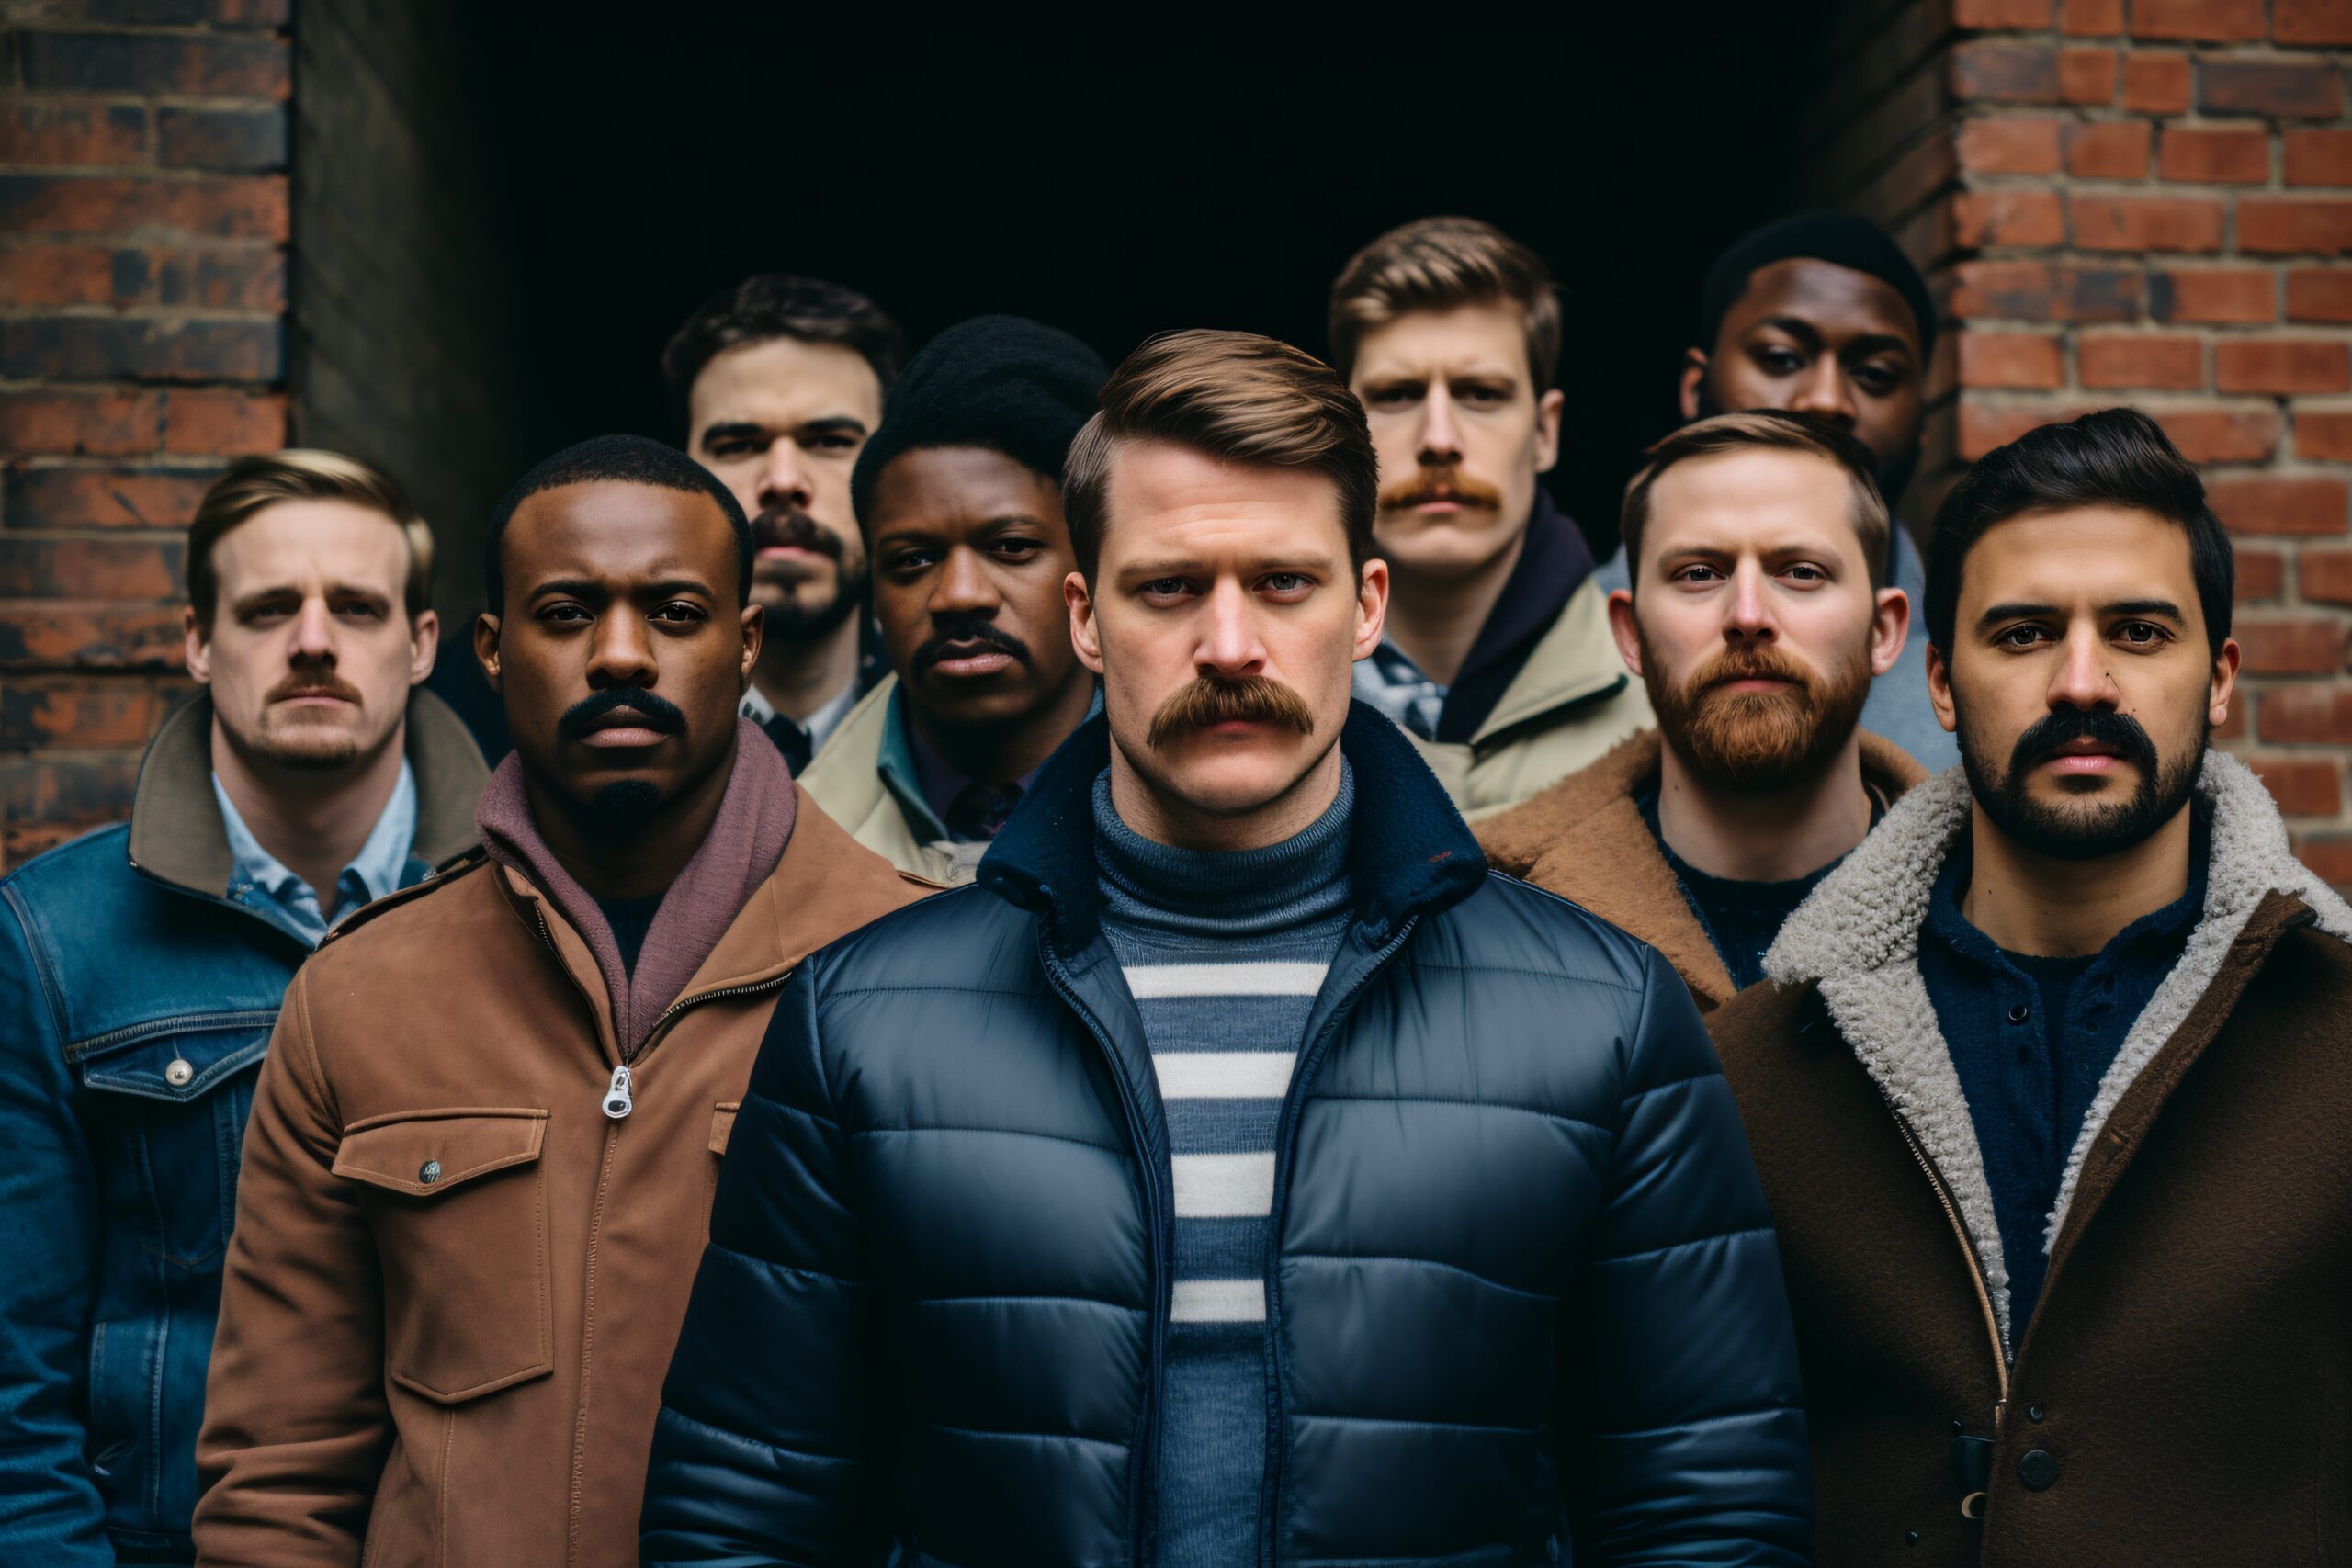 Group of men with moustaches 